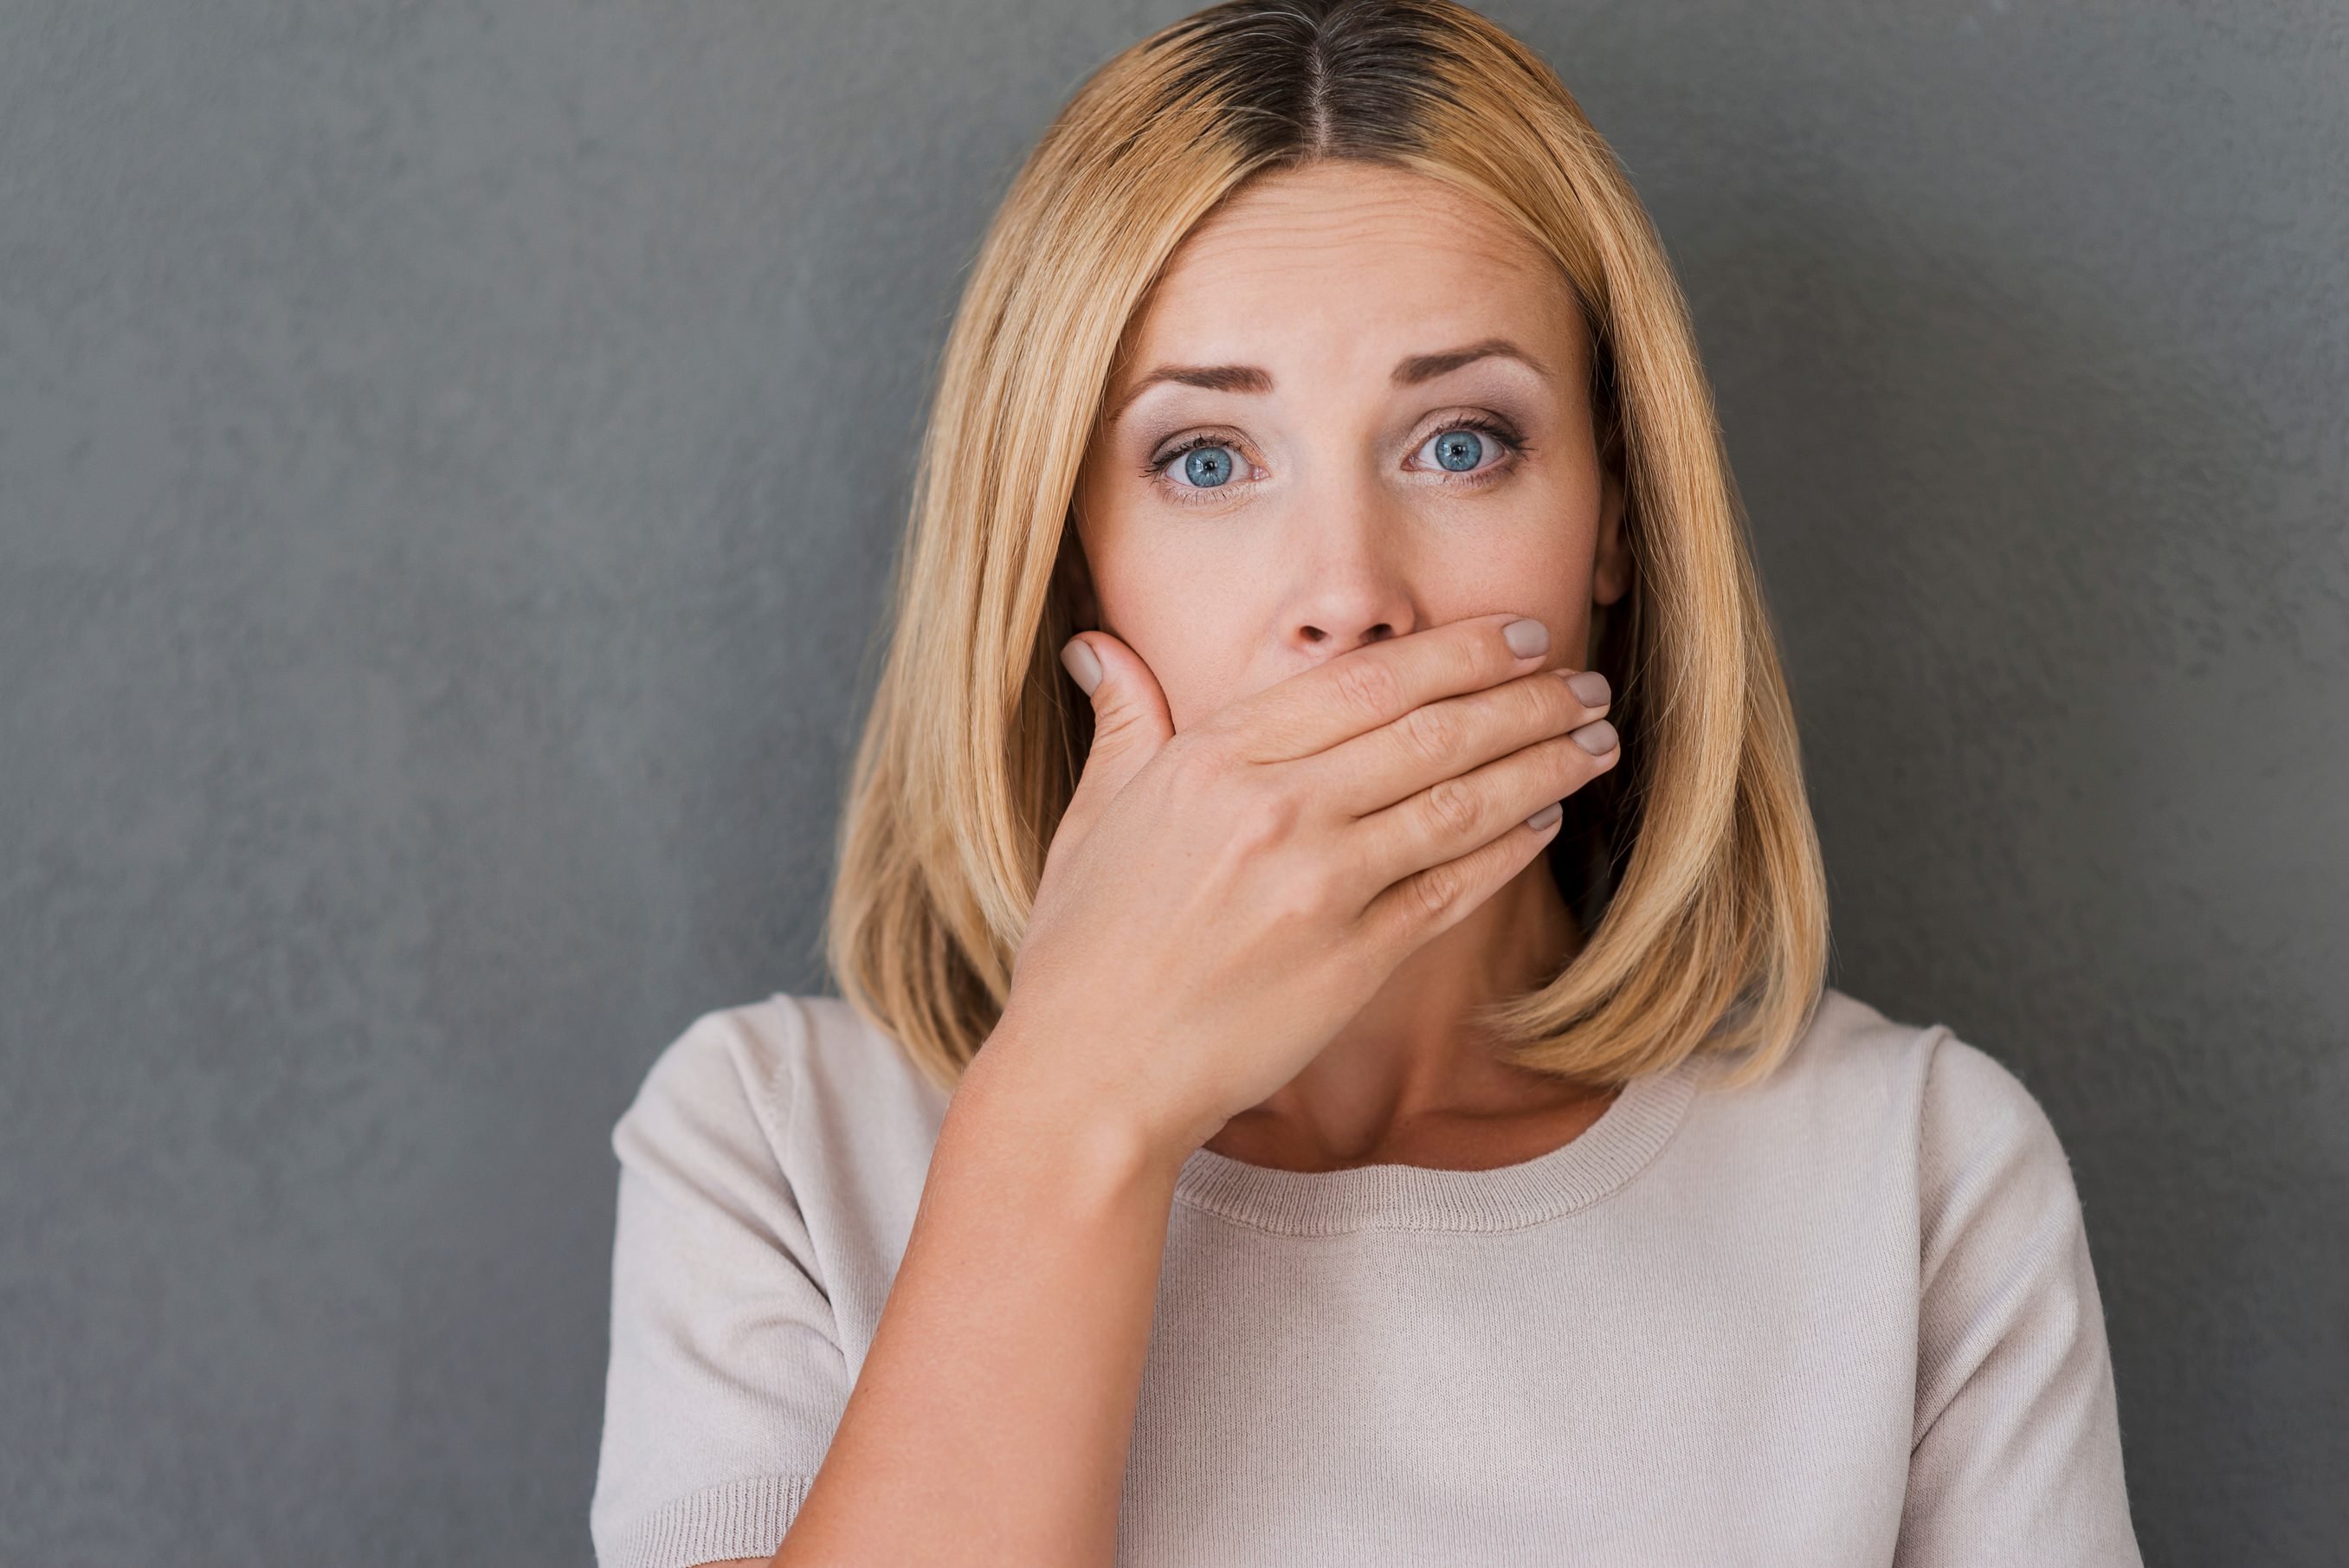 11 Halitosis Remedies to Help You Get Rid of Bad Breath